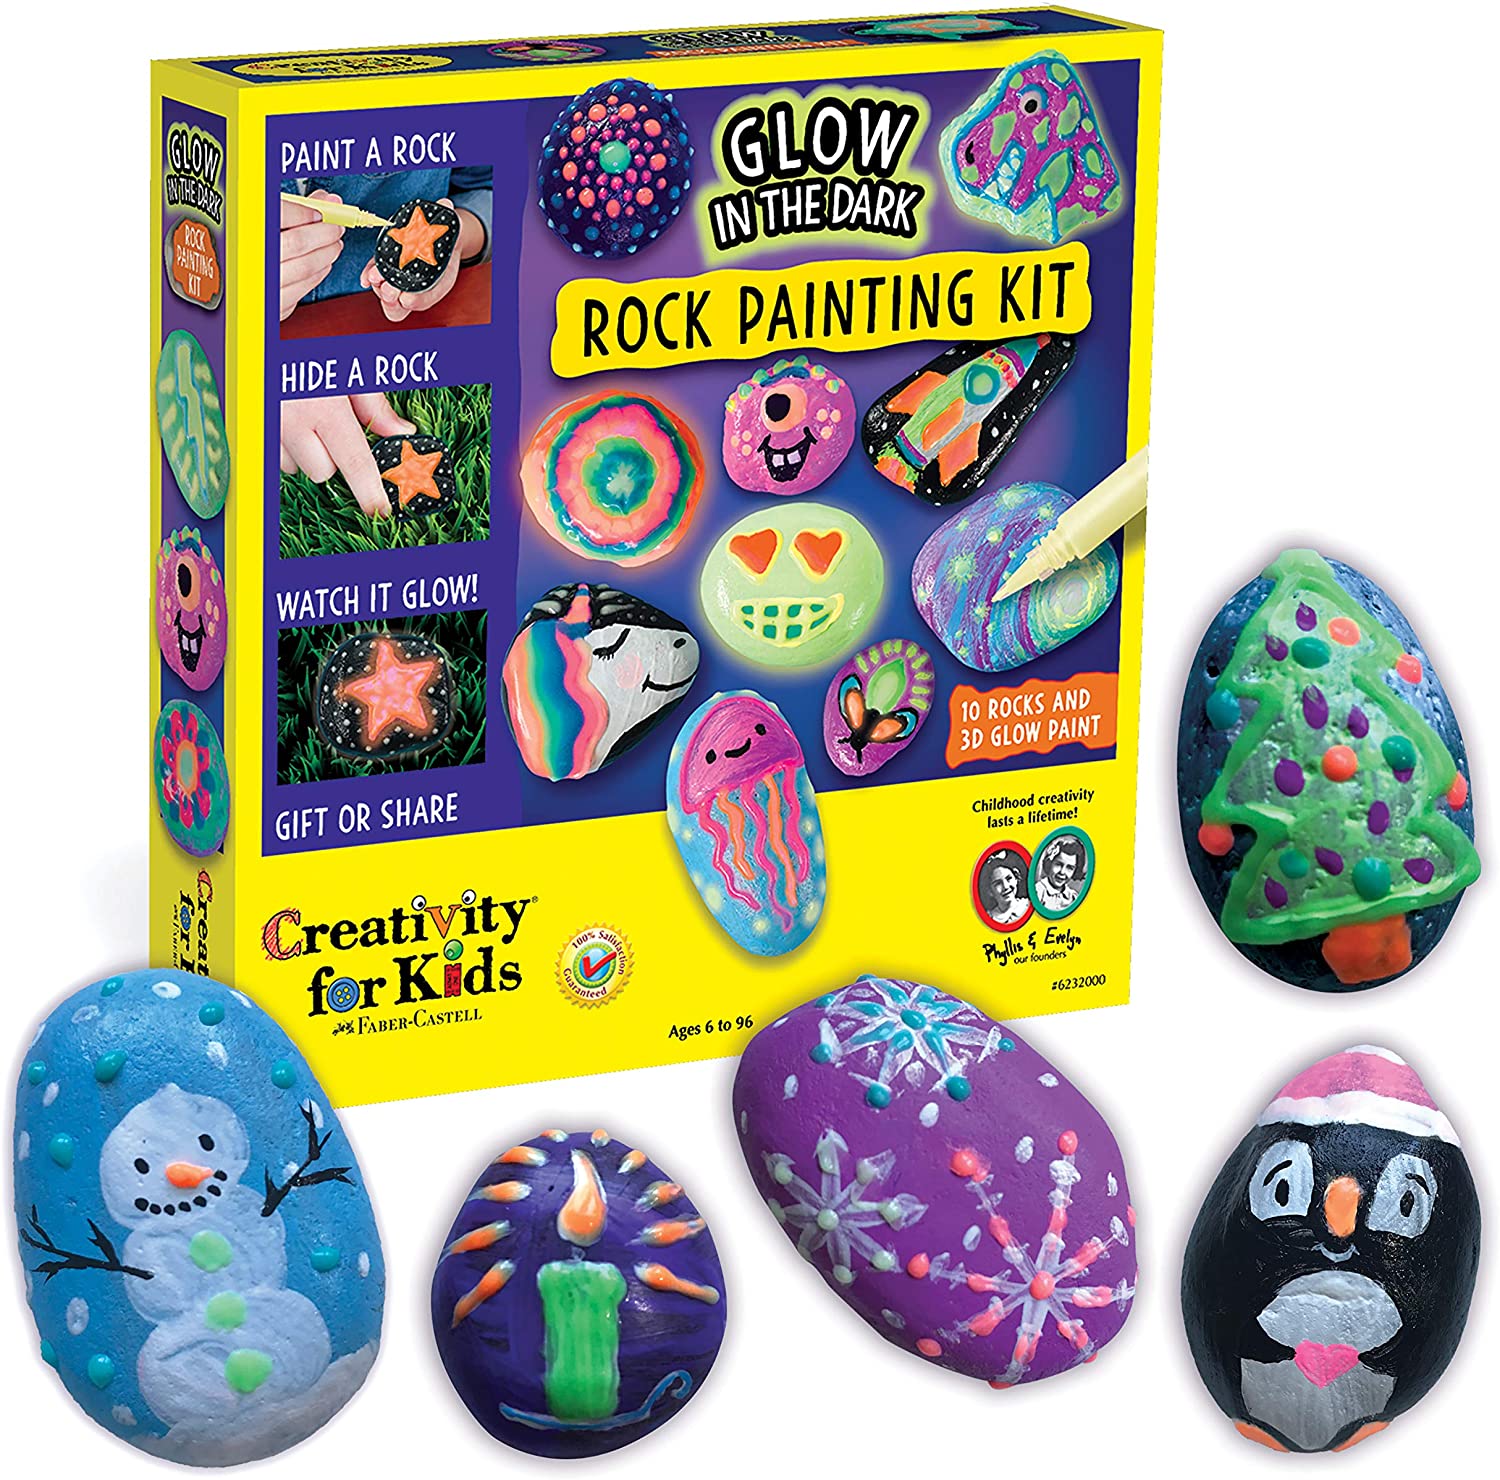 Creativity for Kids Glow In The Dark Rock Painting Kit – Belle's